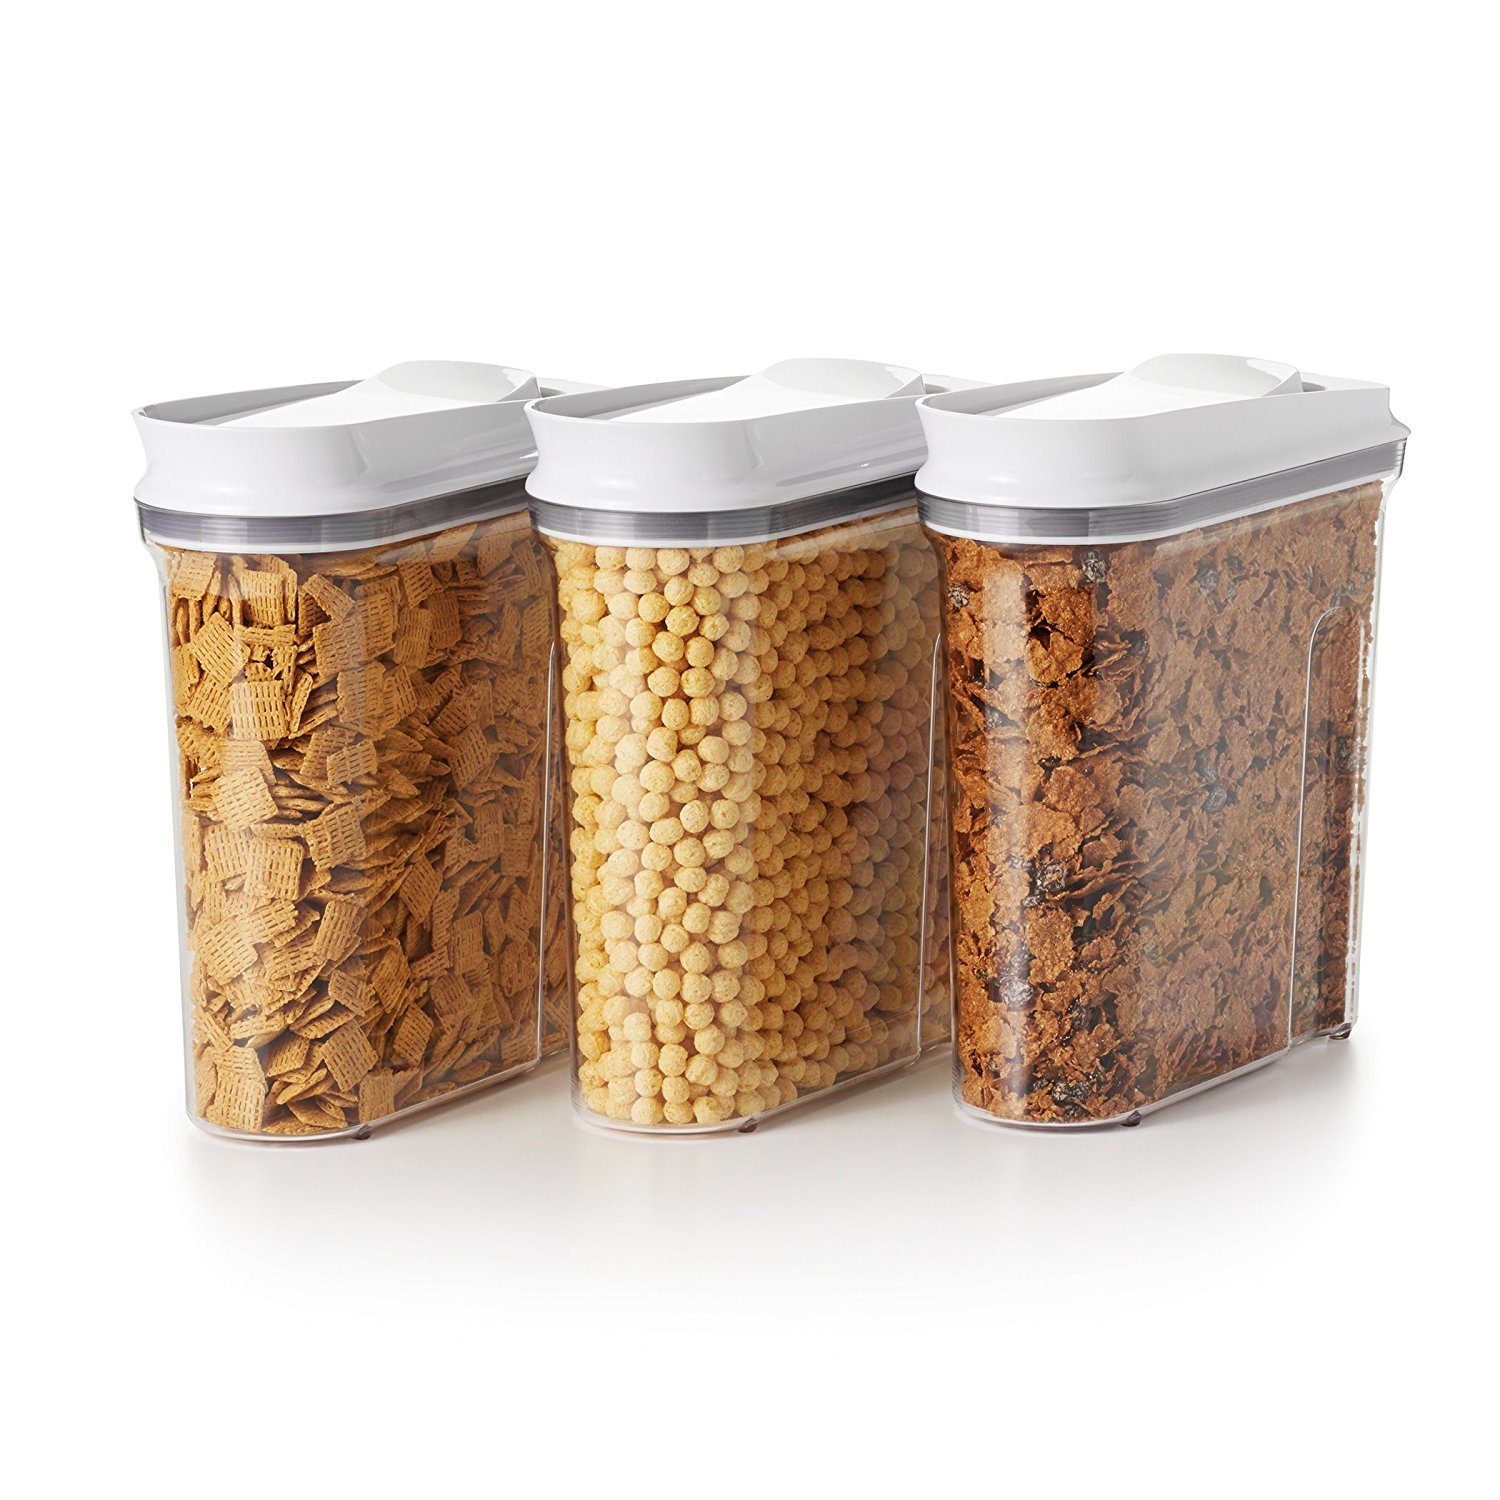 OXO Good Grips Airtight POP Cereal Containers, 3-Piece